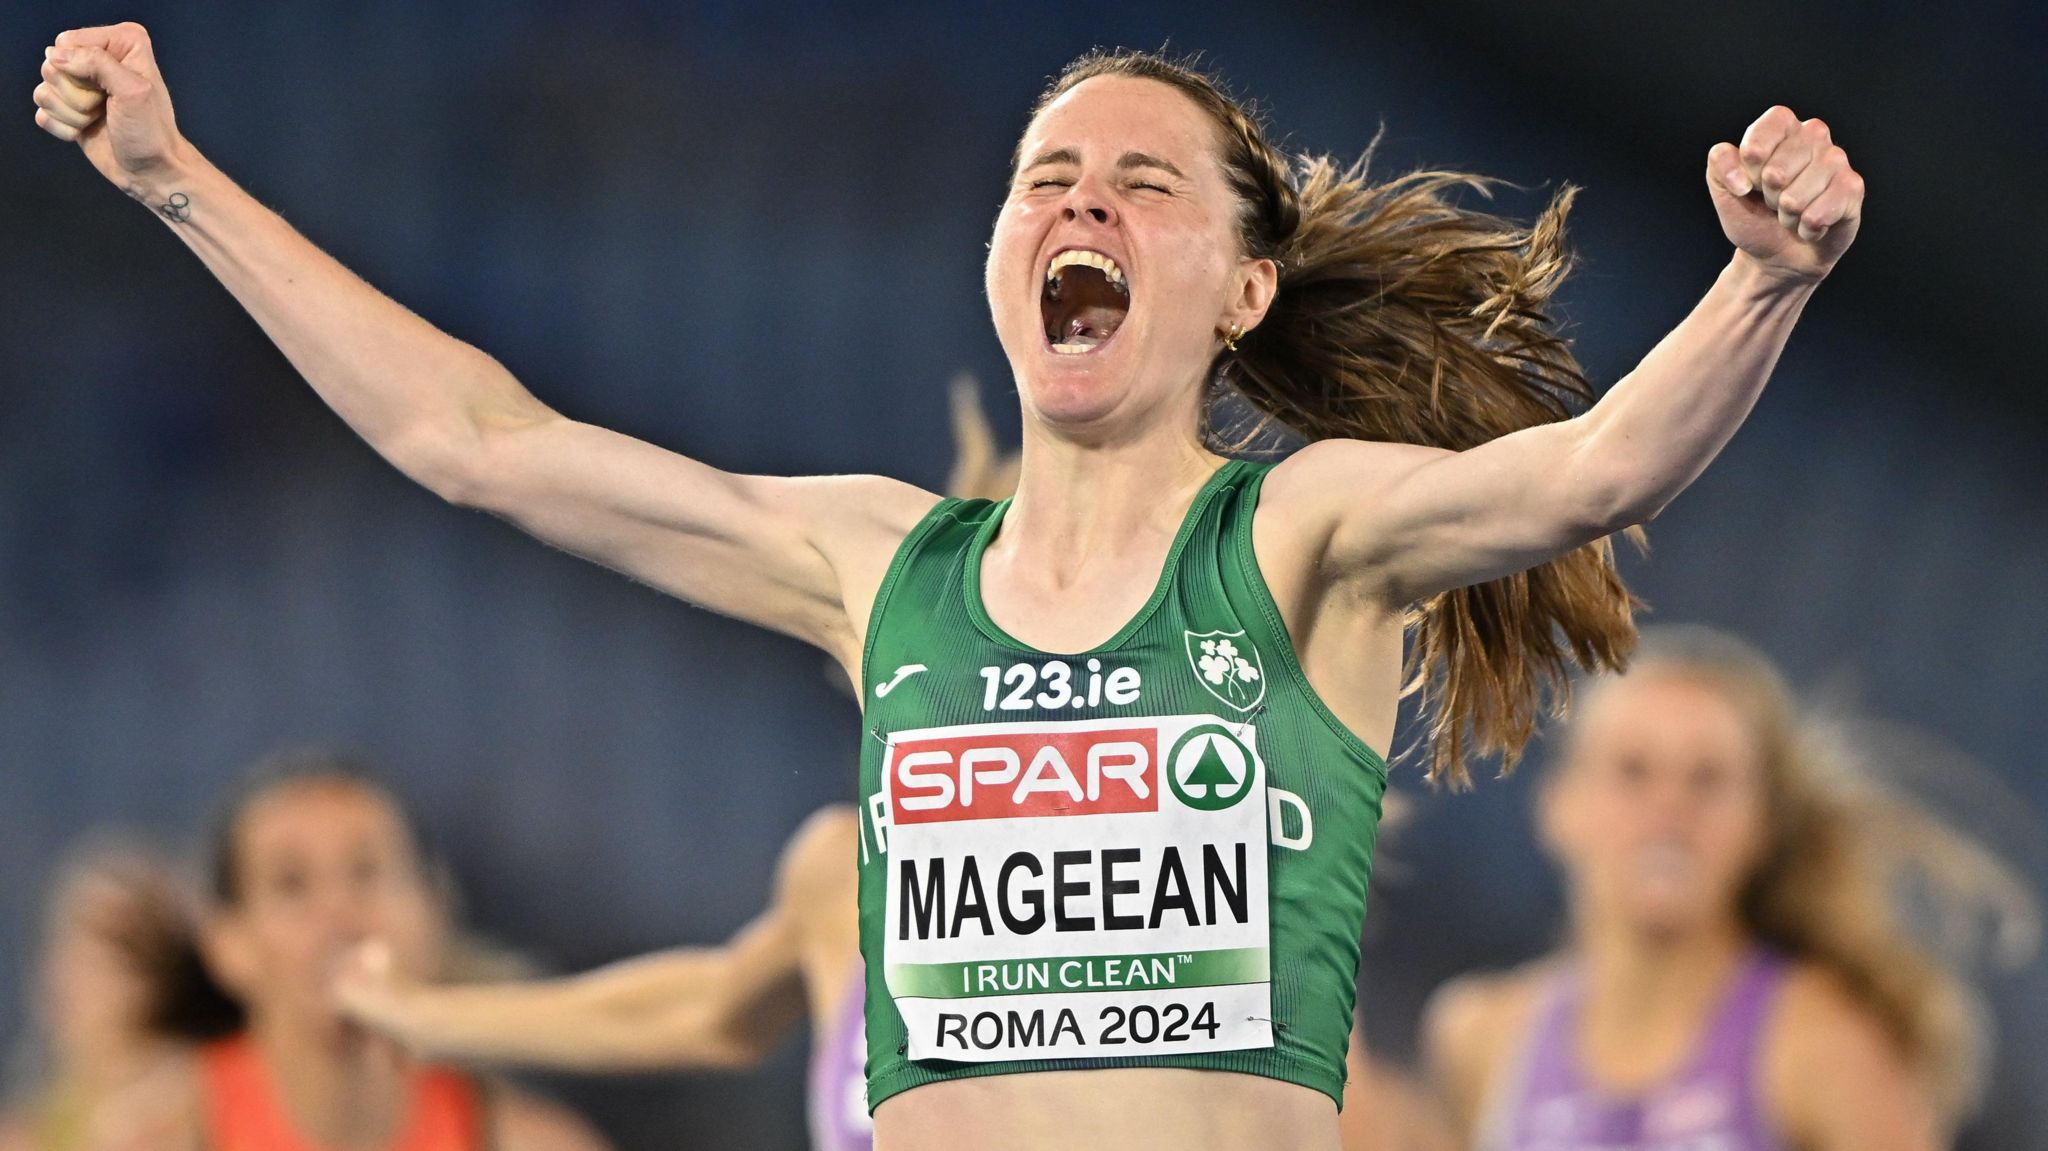 Mageean celebrating after winning 1500m gold for Ireland